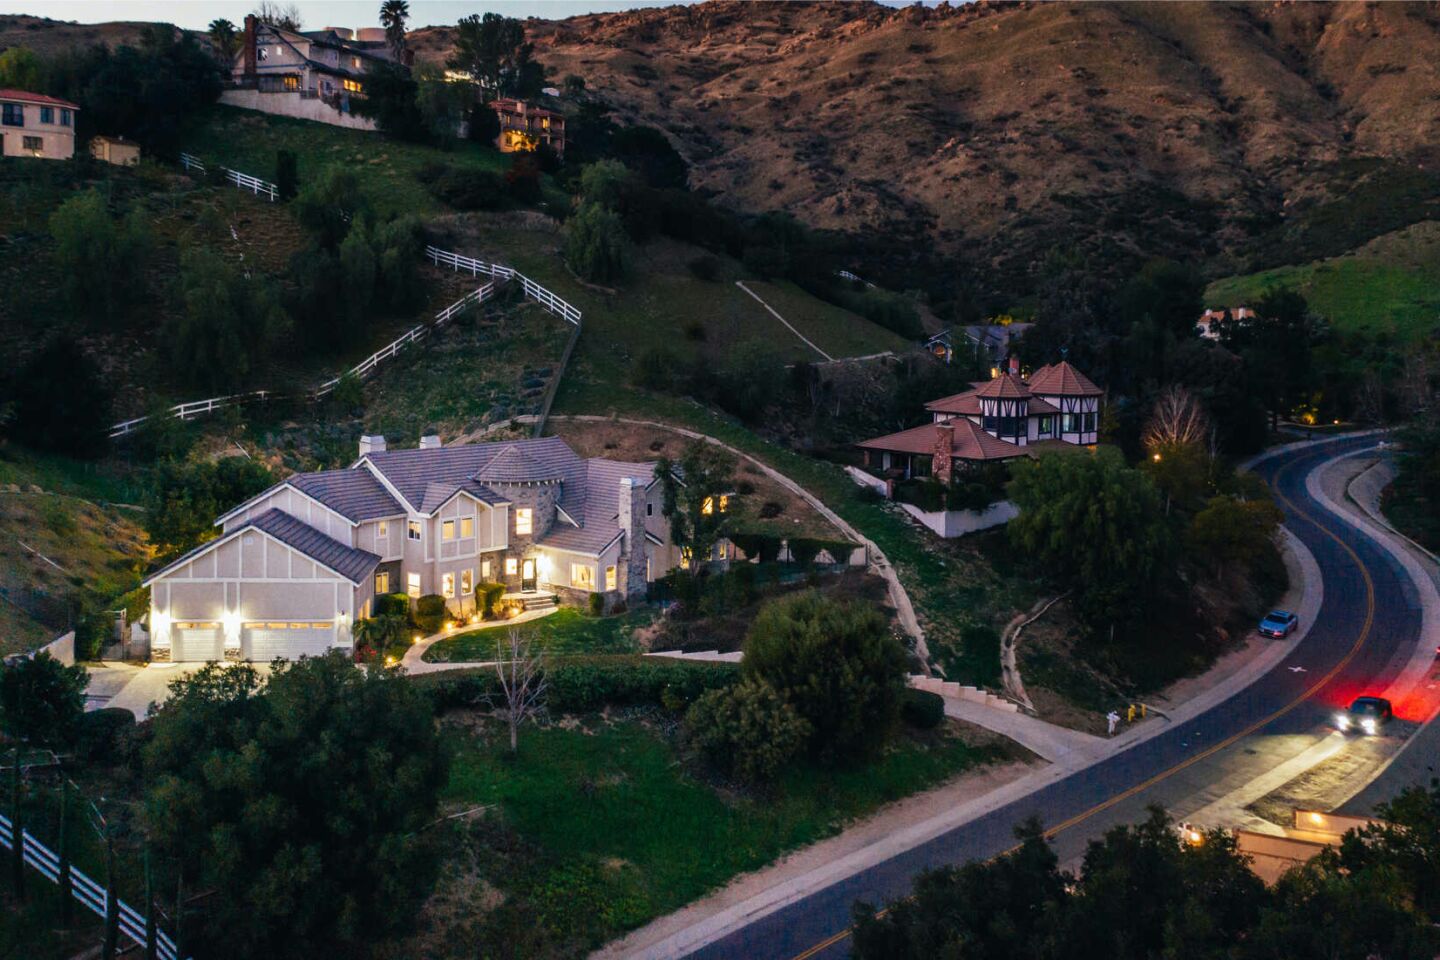 Aerial view of the two-story home amid hills, with a winding road in front.